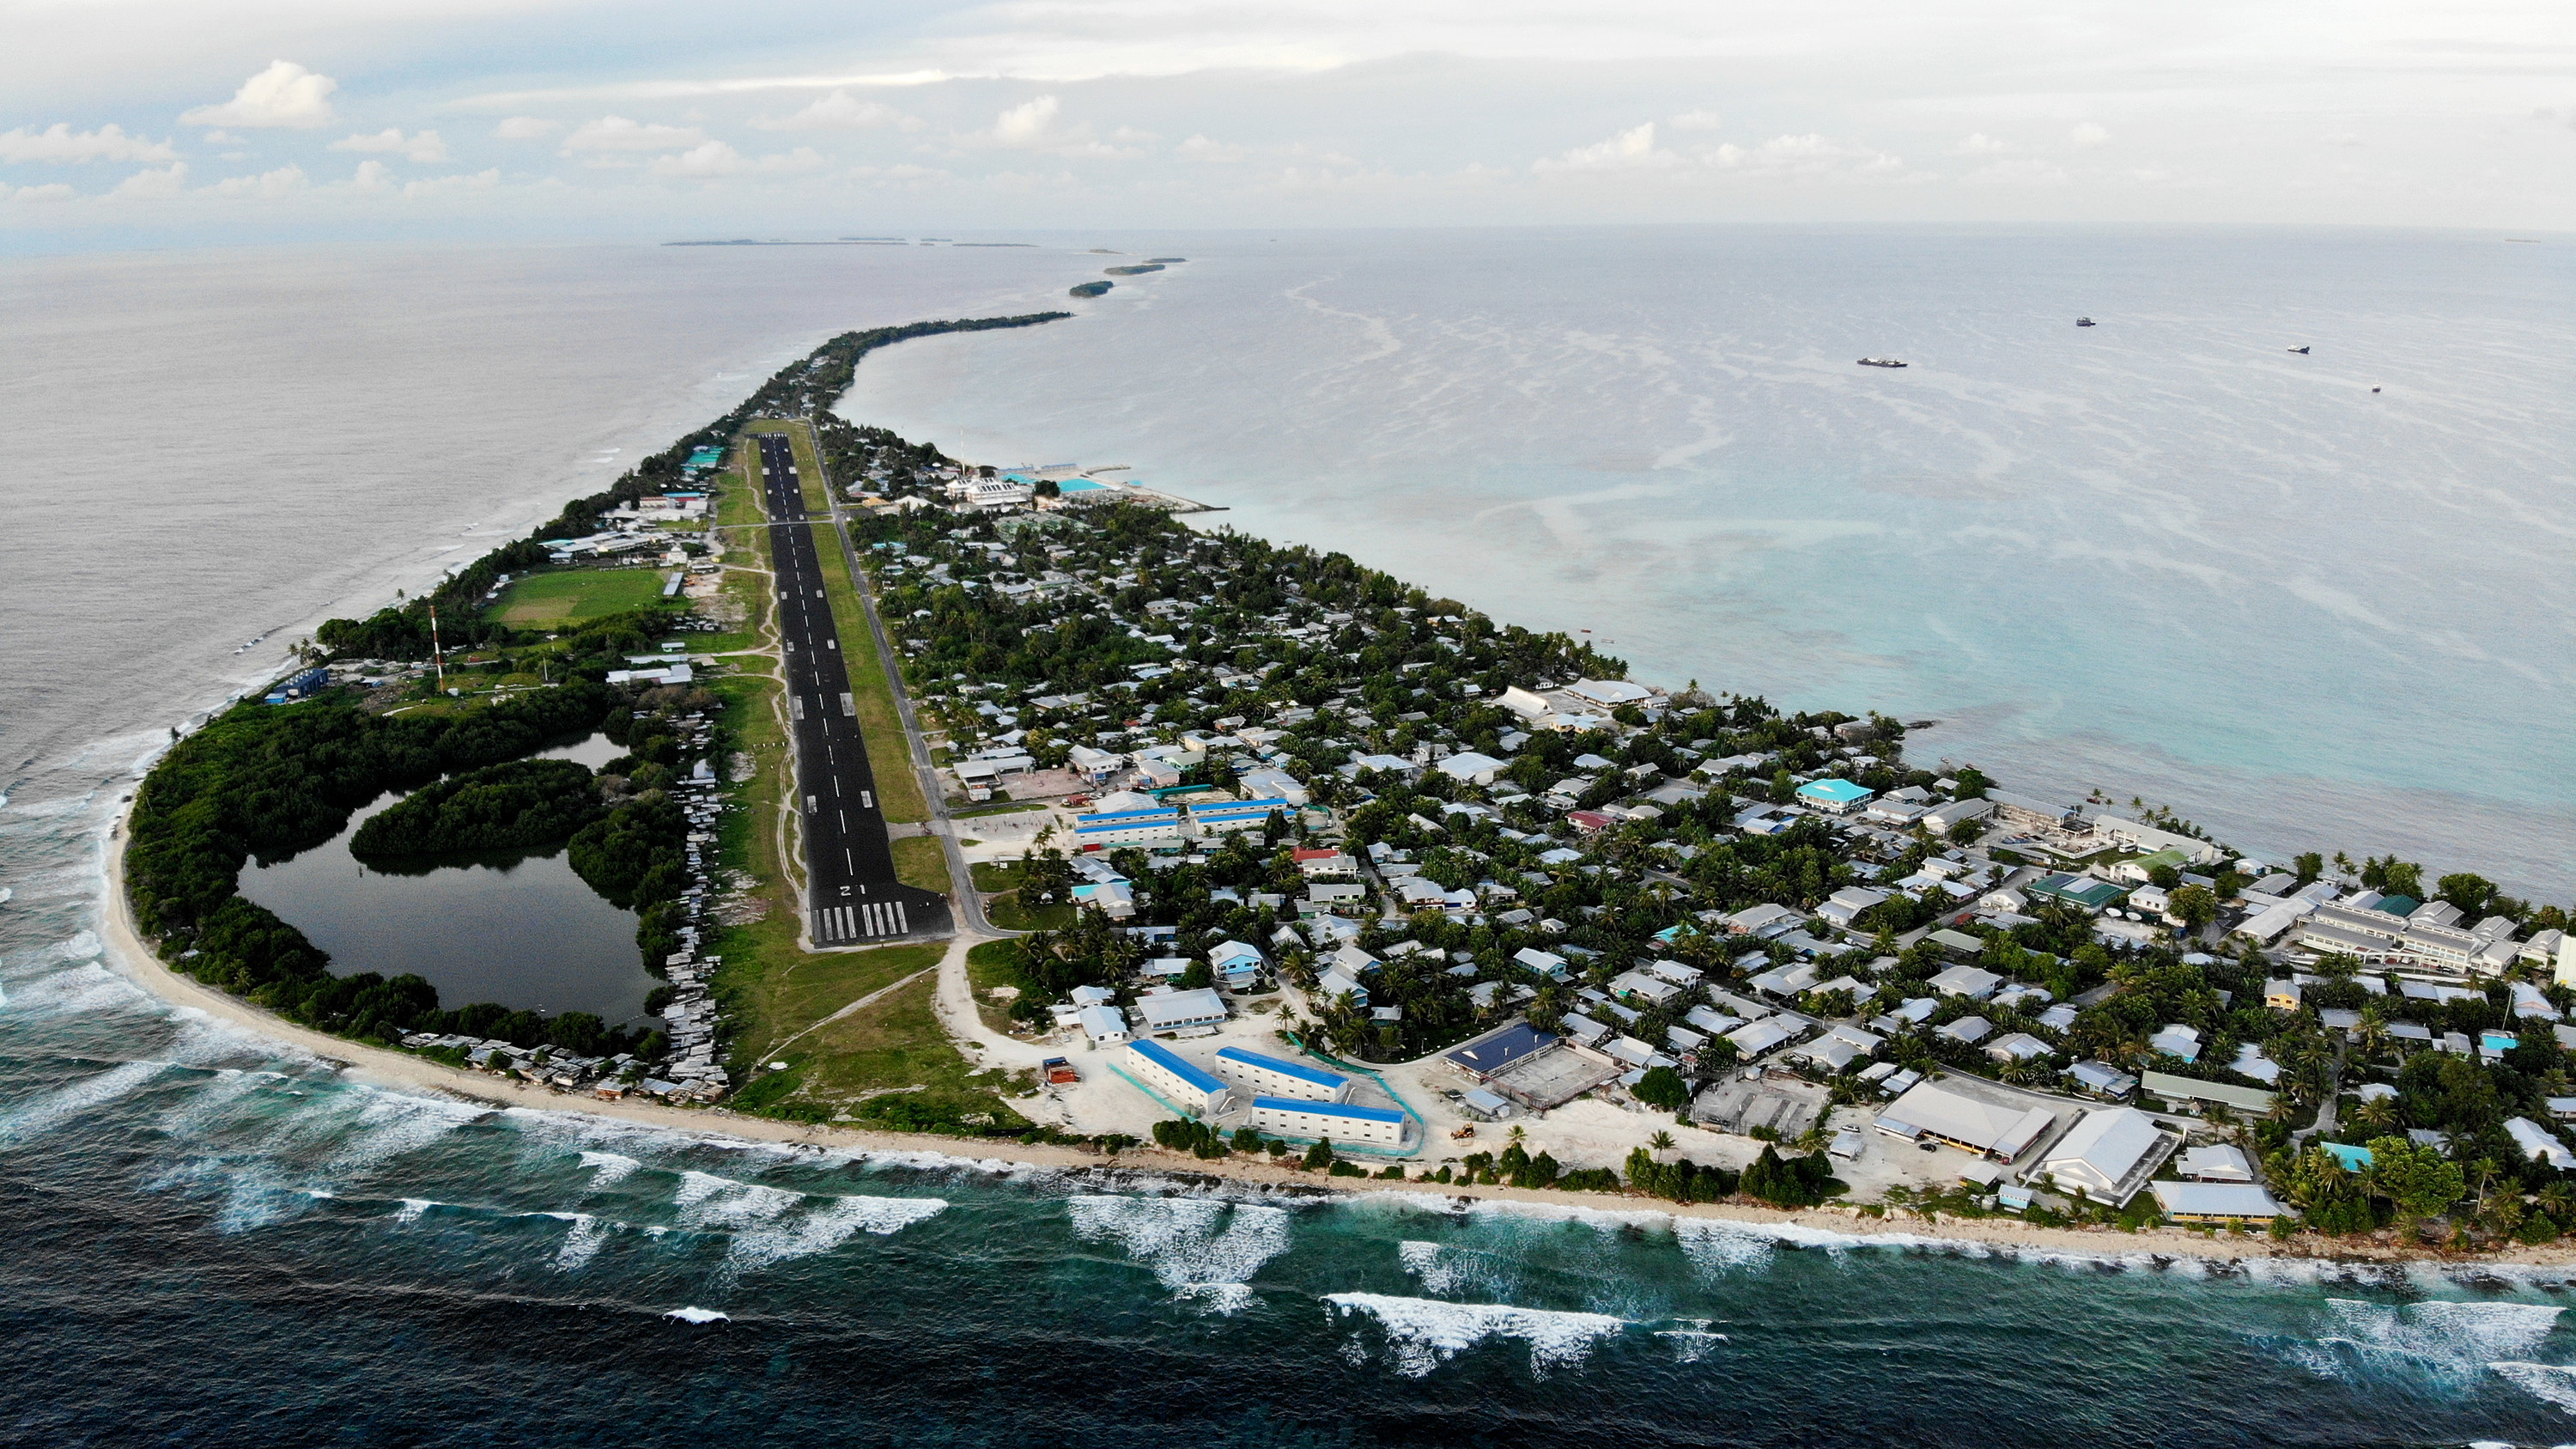 An aerial view of downtown and the airport runway, between the Pacific Ocean and lagoon in Funafuti, Tuvalu